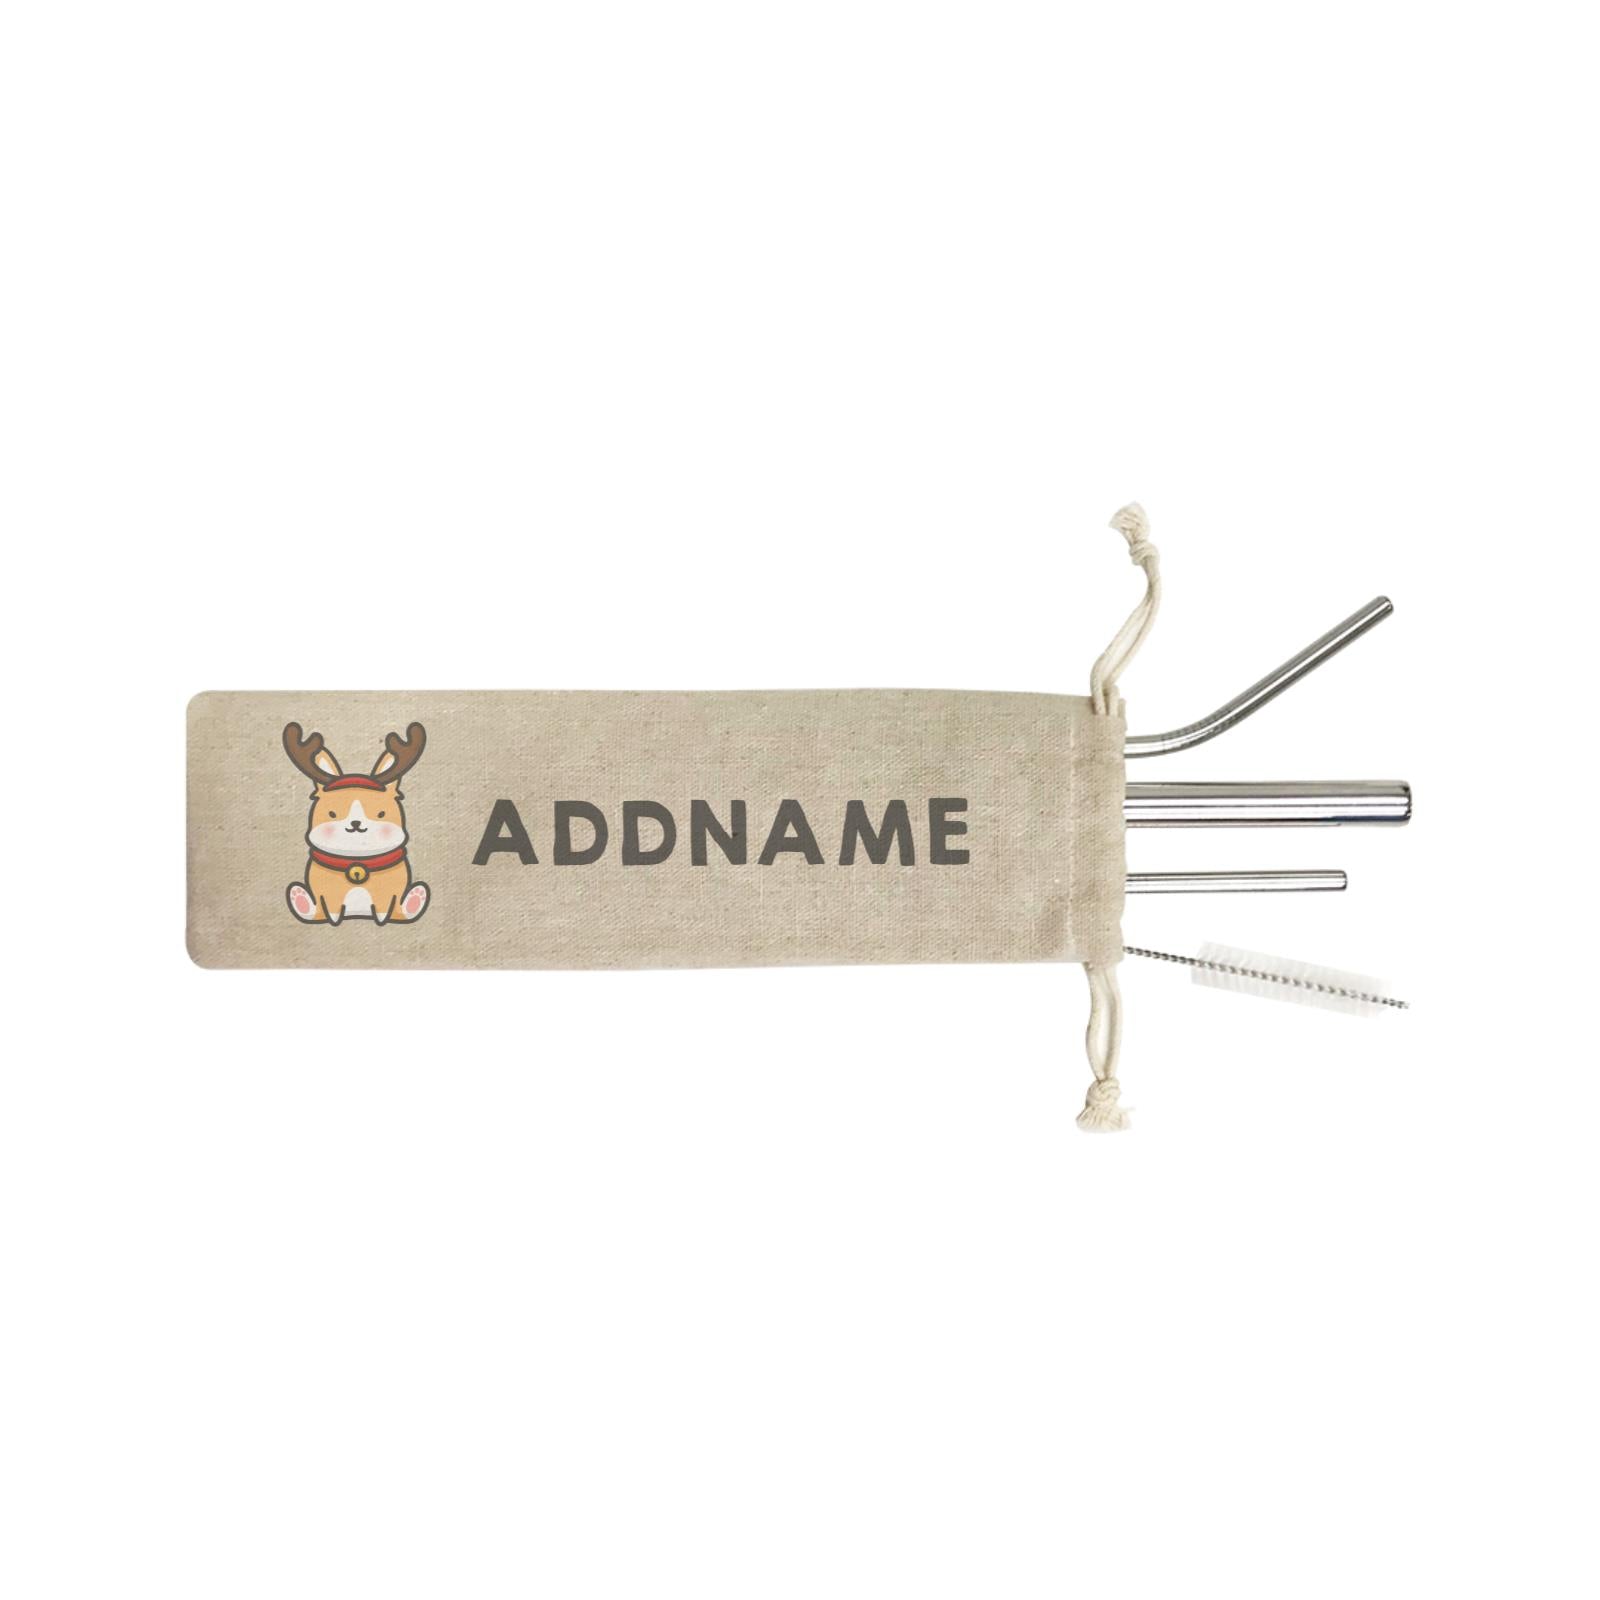 Xmas Cute Dog With Reindeer Antlers Addname SB 4-in-1 Stainless Steel Straw Set In a Satchel